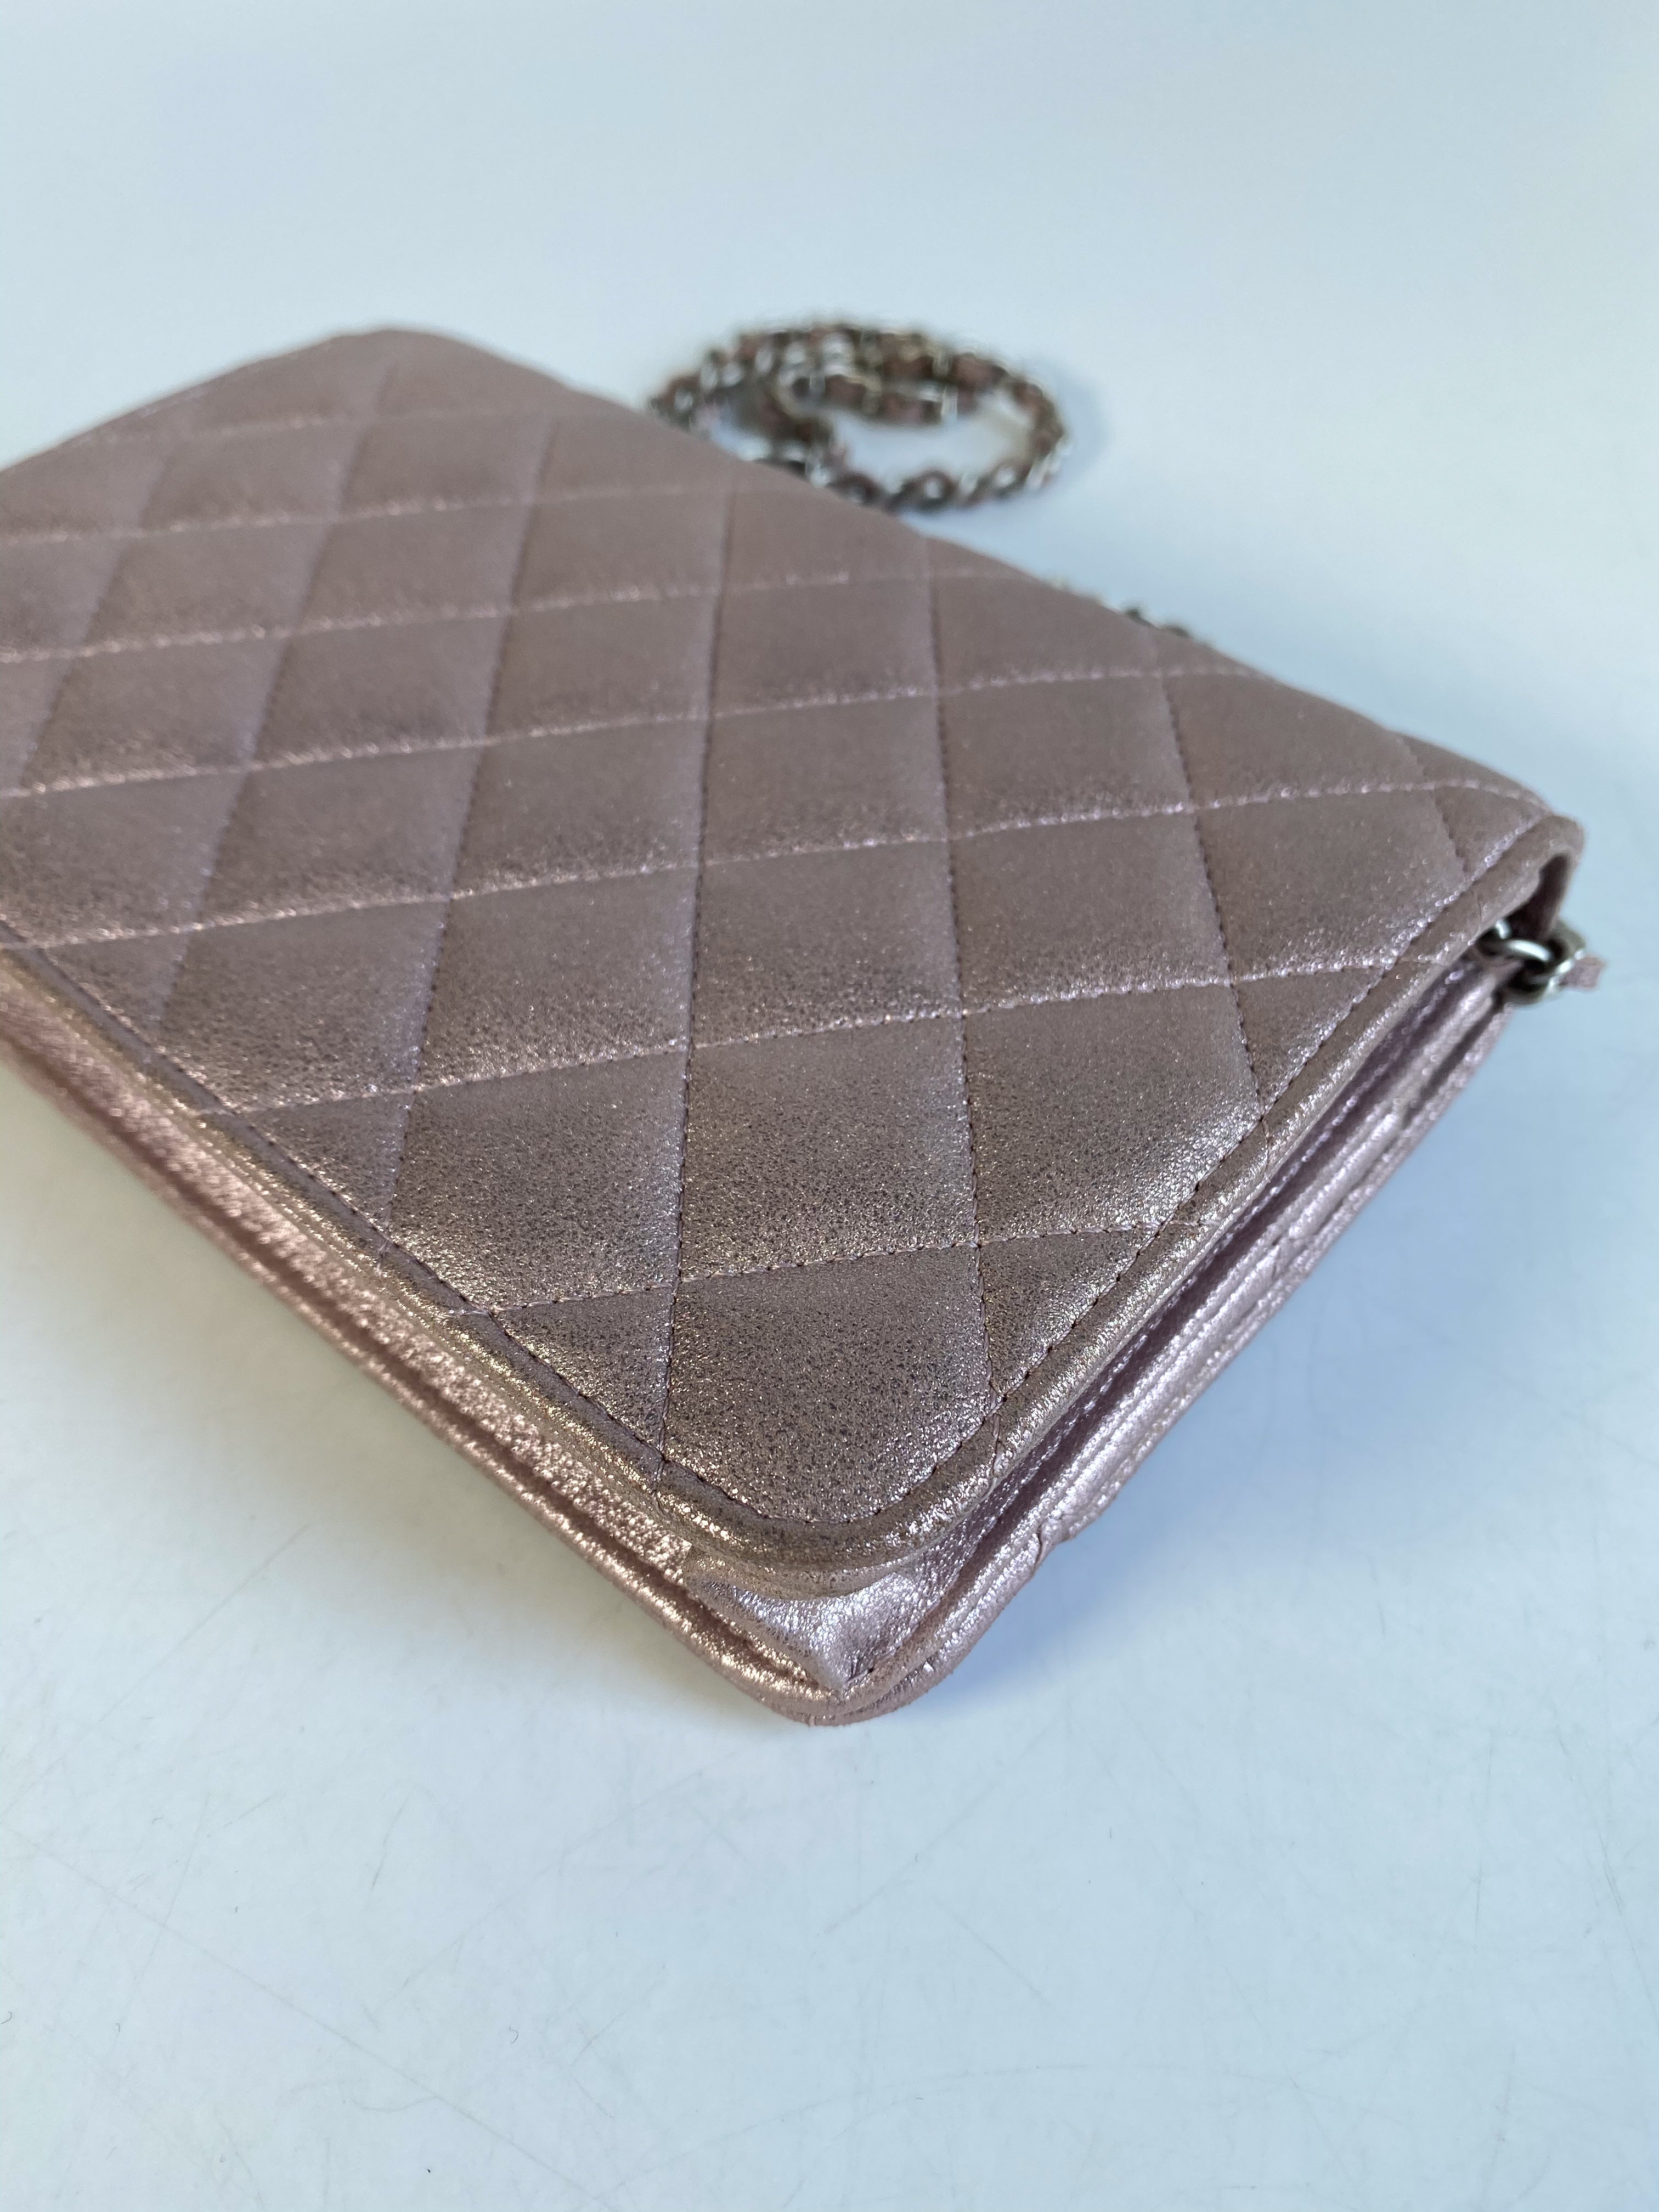 Chanel Pink Iridescent 19S Woc Wallet CC